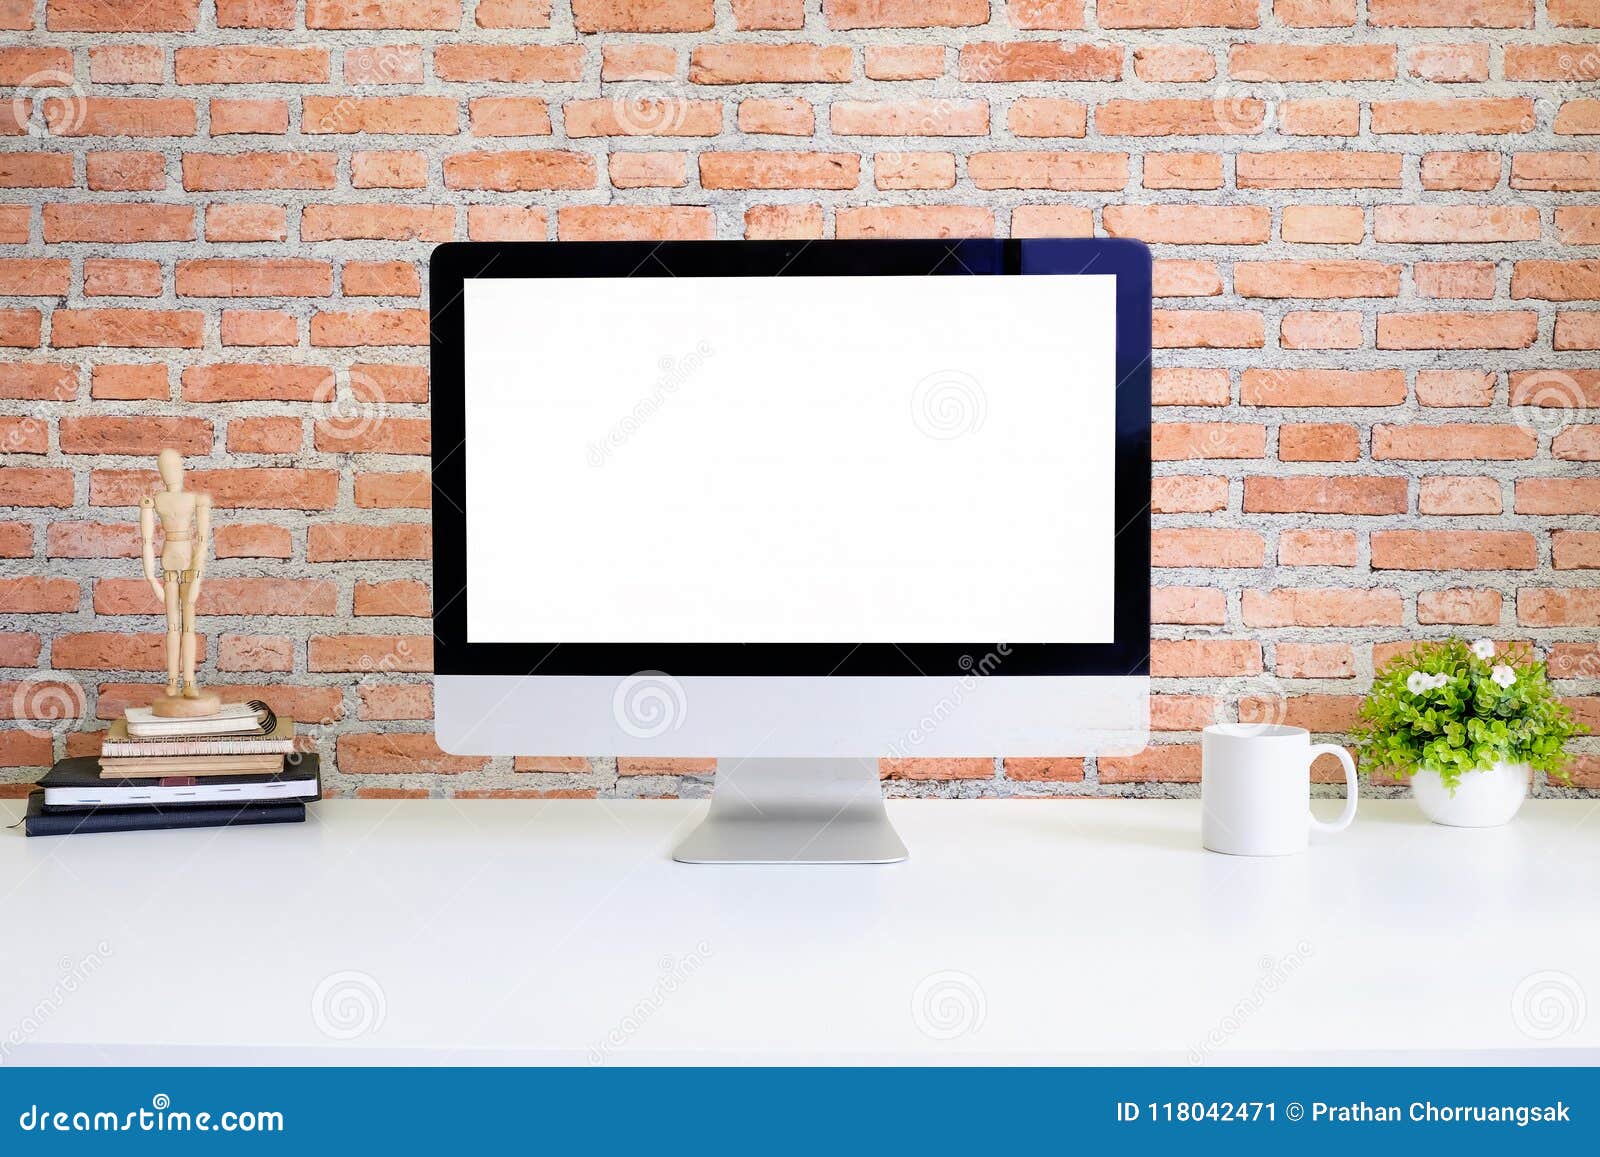 Workspace Computer Pc On White Table And Brick Wall Stock Image